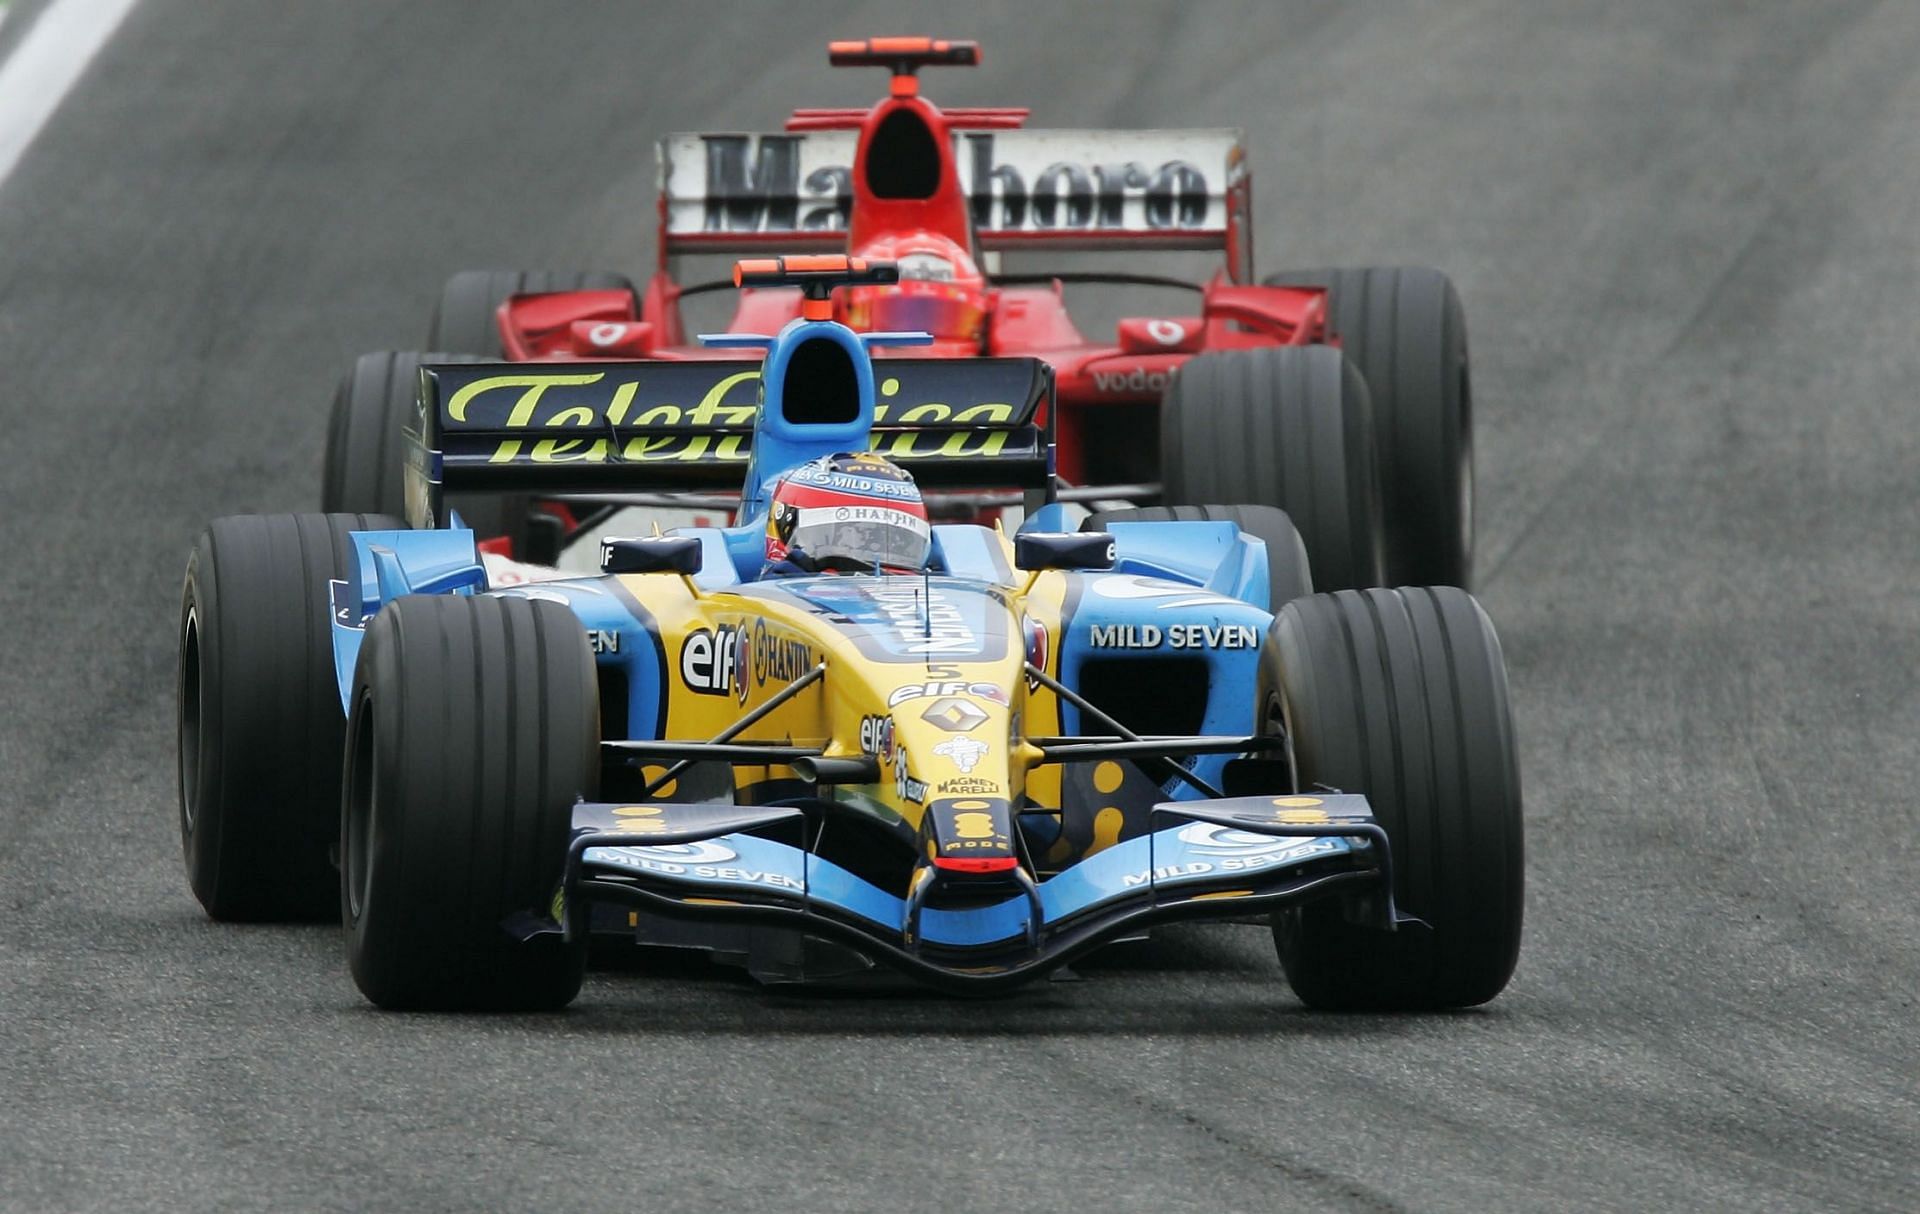 Imola GP 2005 was truly a battle for the ages